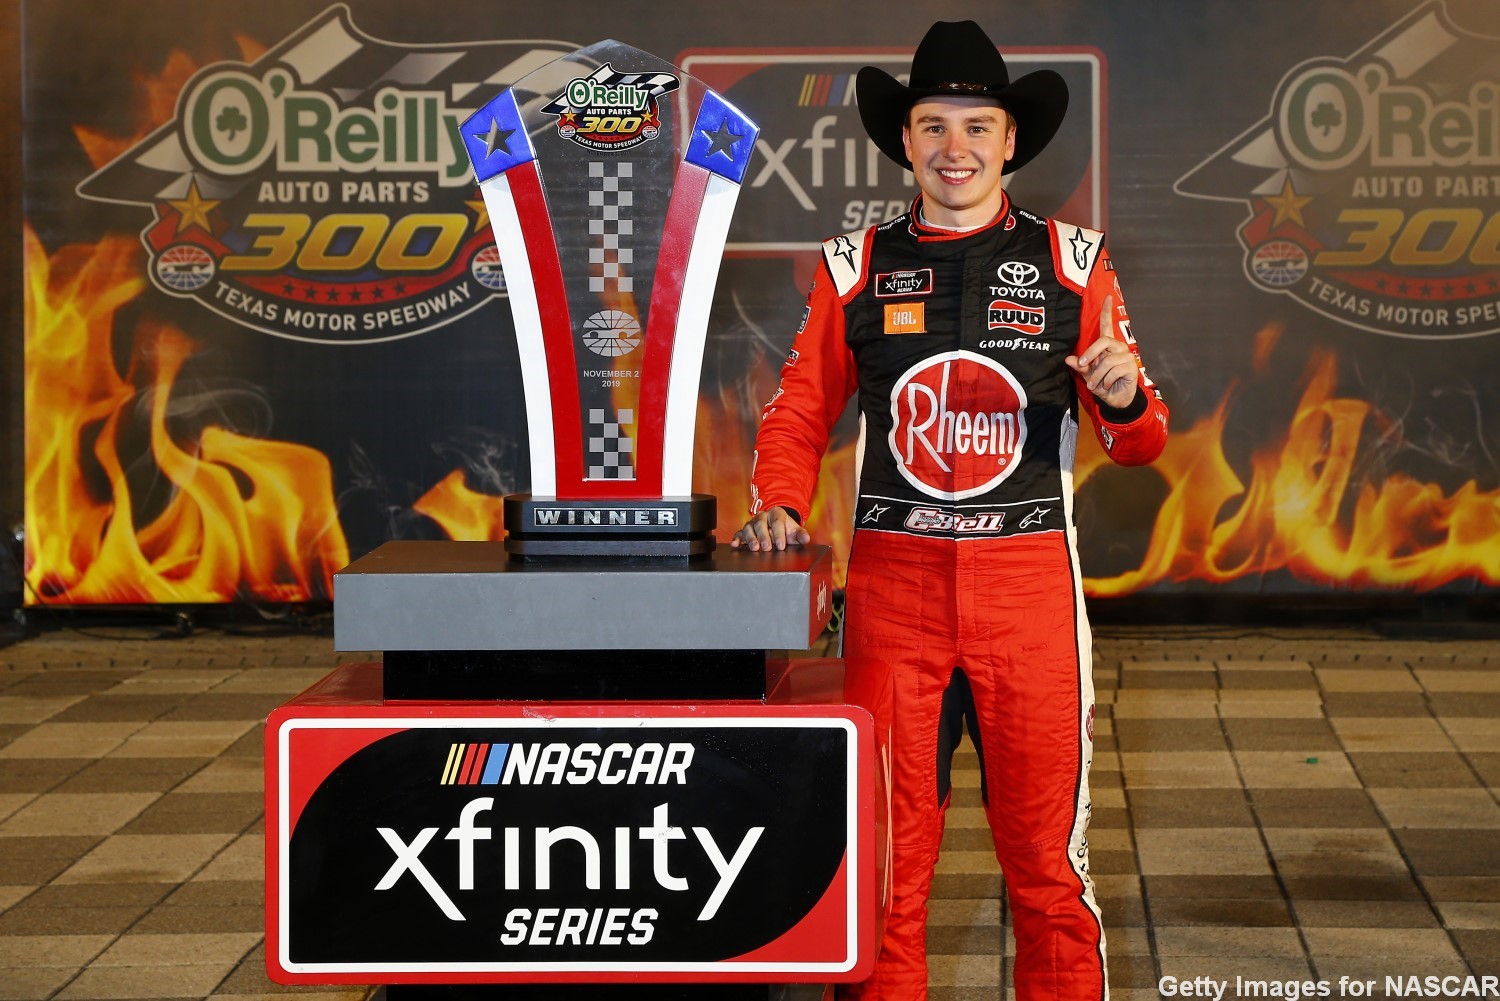 Christopher Bell poses with the trophy in Victory Lane after winning Saturday night's NASCAR Xfinity Series race at Texas Motor Speedway